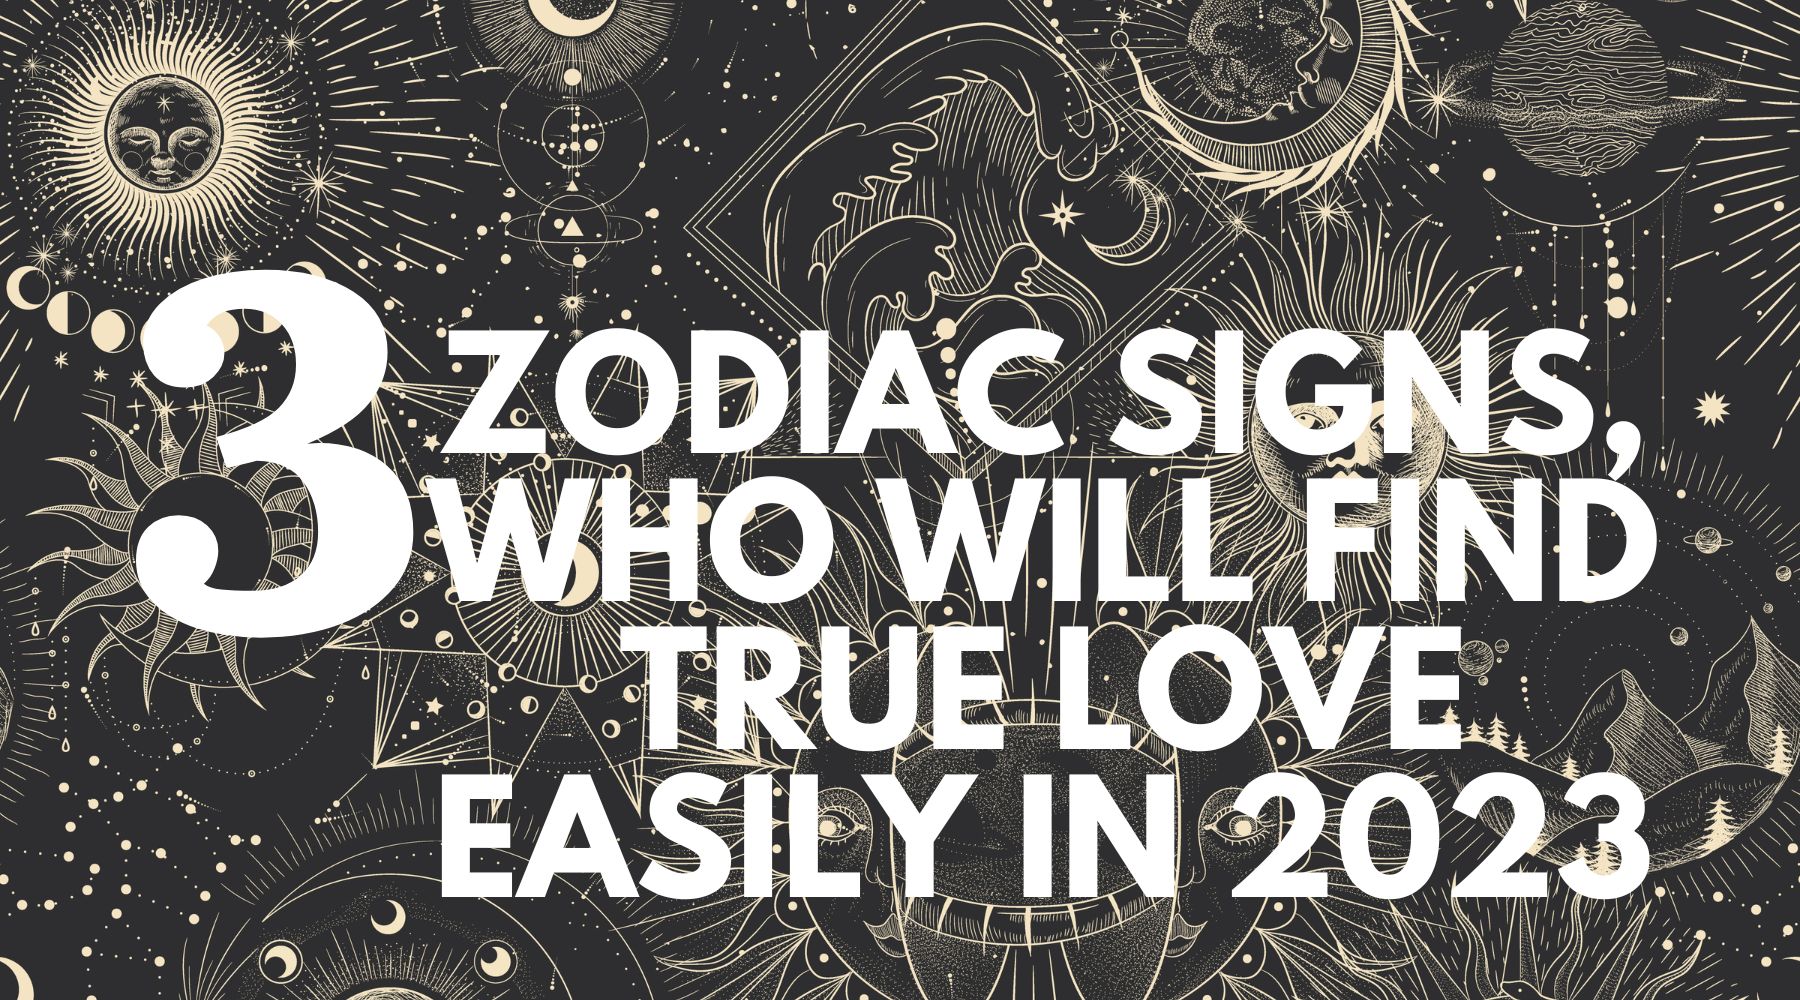 3 zodiac signs, who will find true love easily in 2023